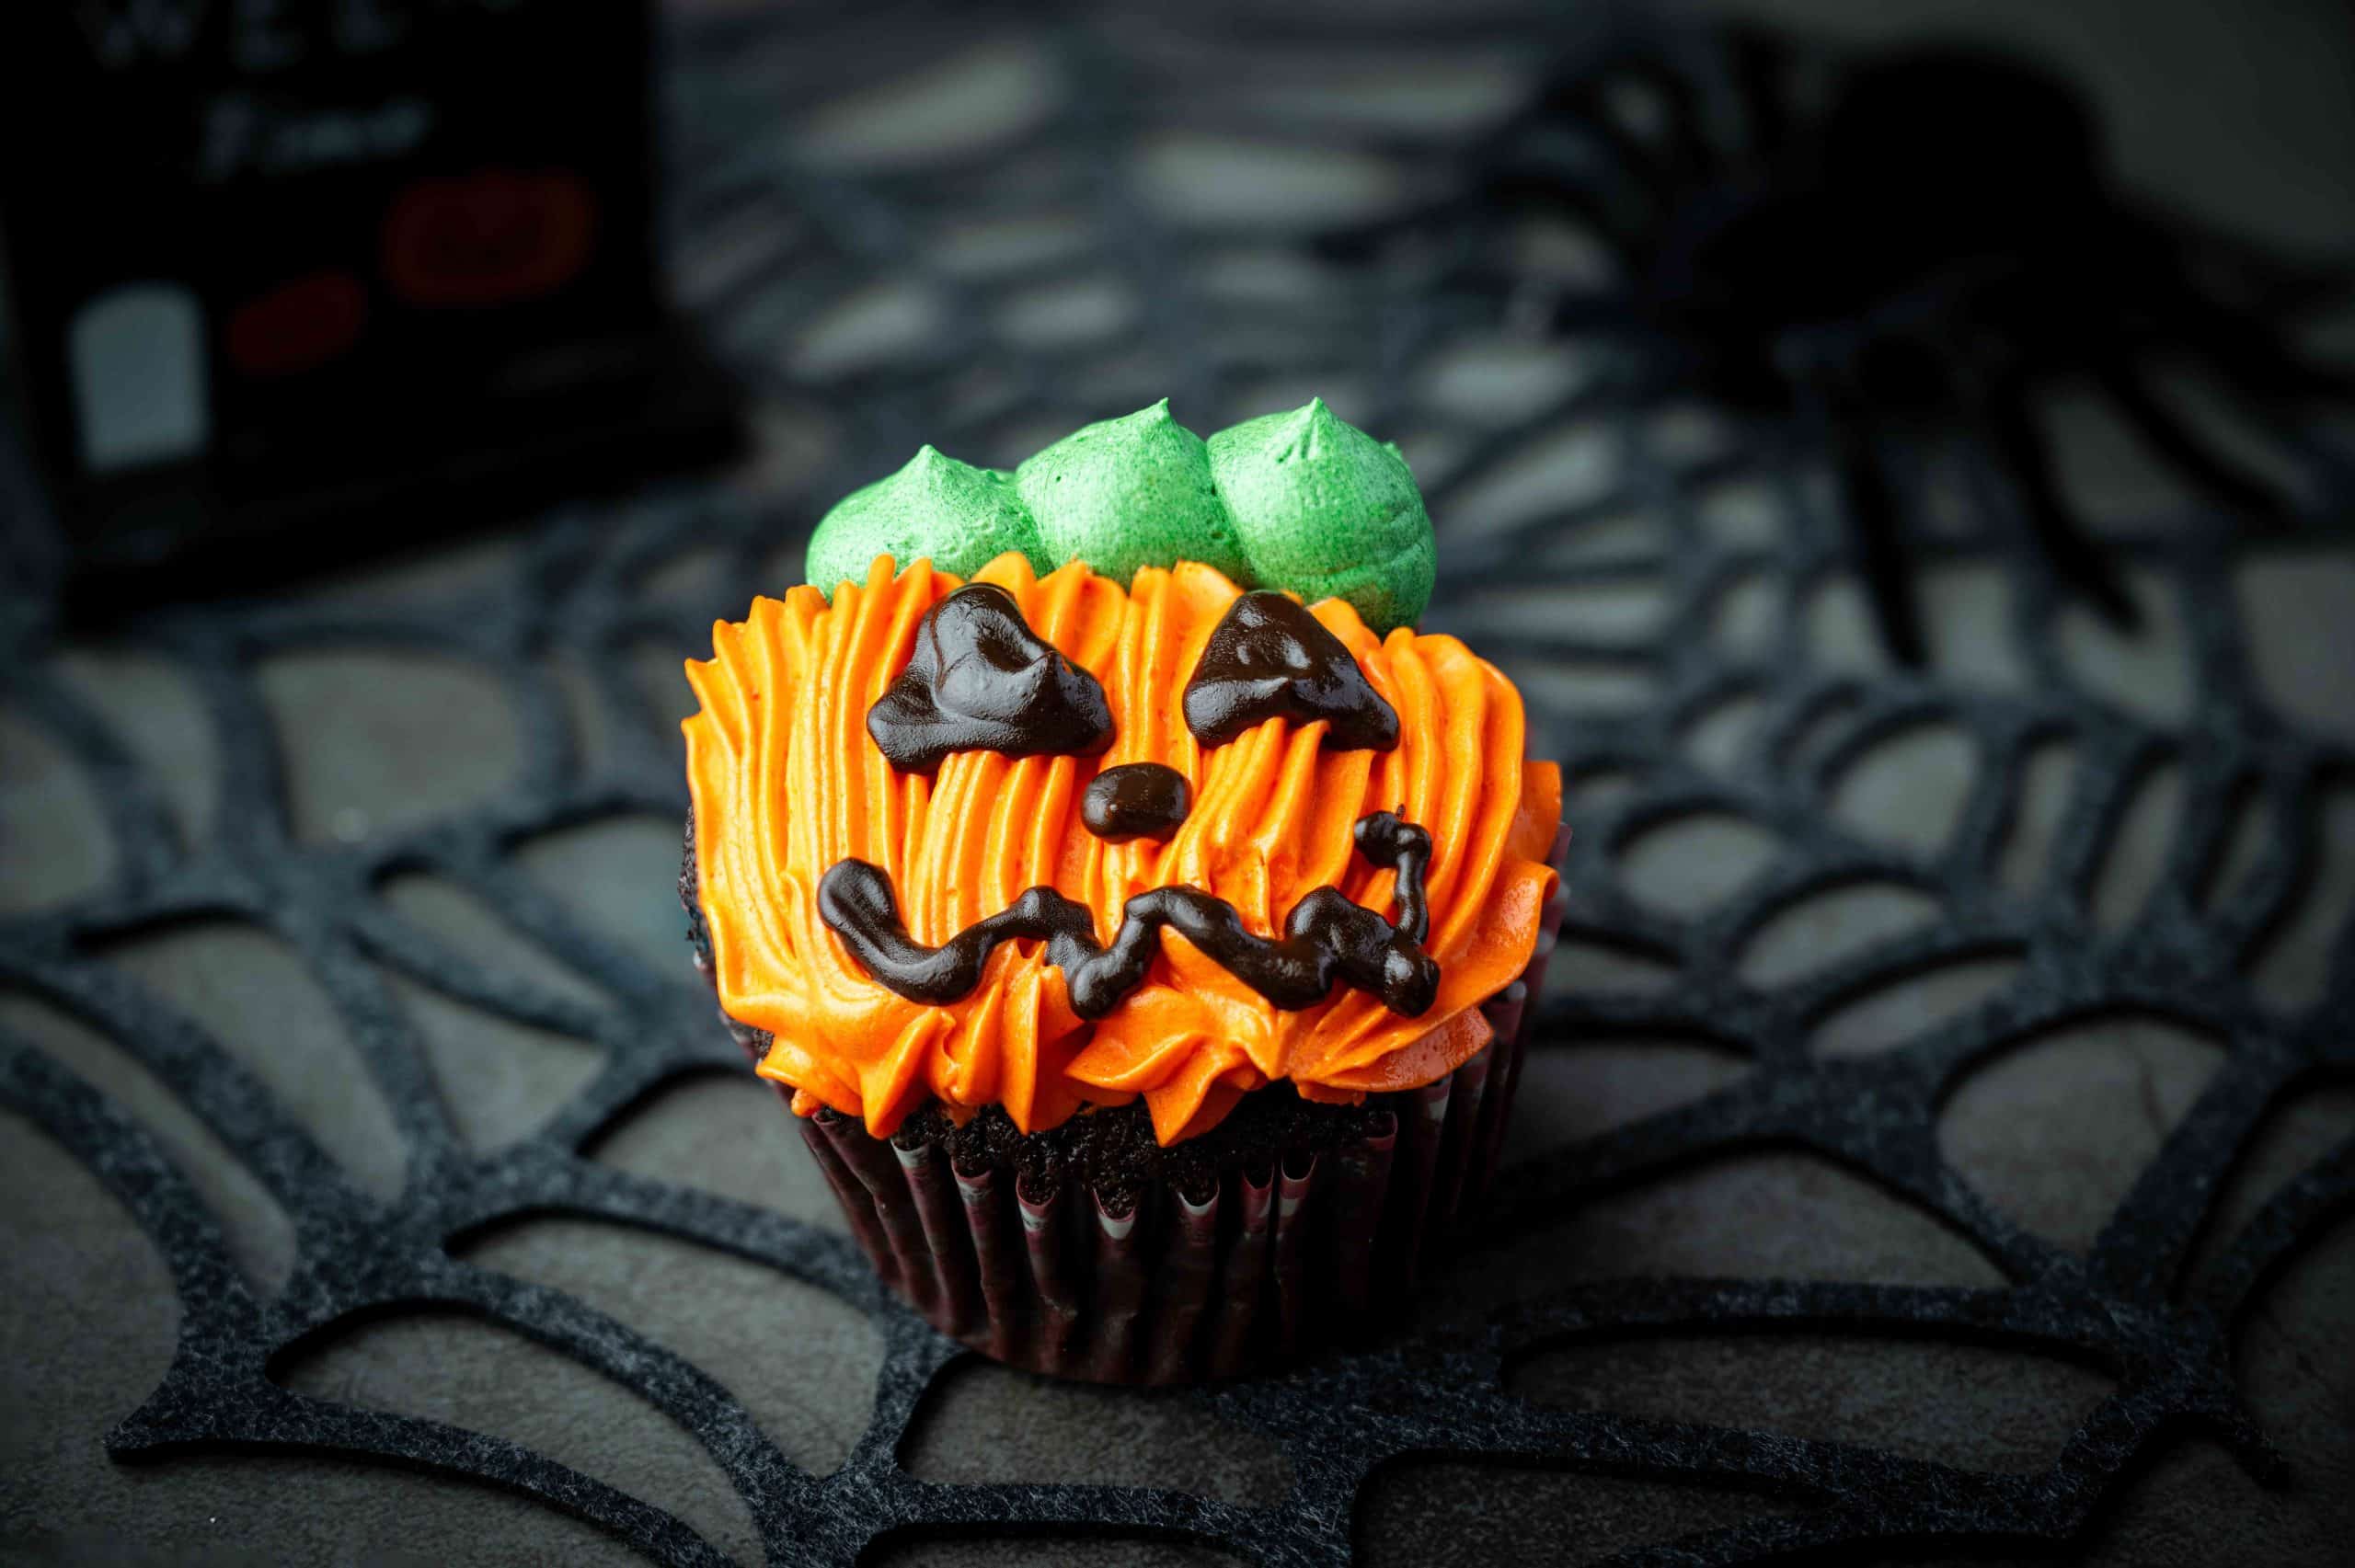 “Pumpkin Spice and Everything Nice!” These Pumkin Cupcakes that Screams ‘Halloween’ With Every Bite!